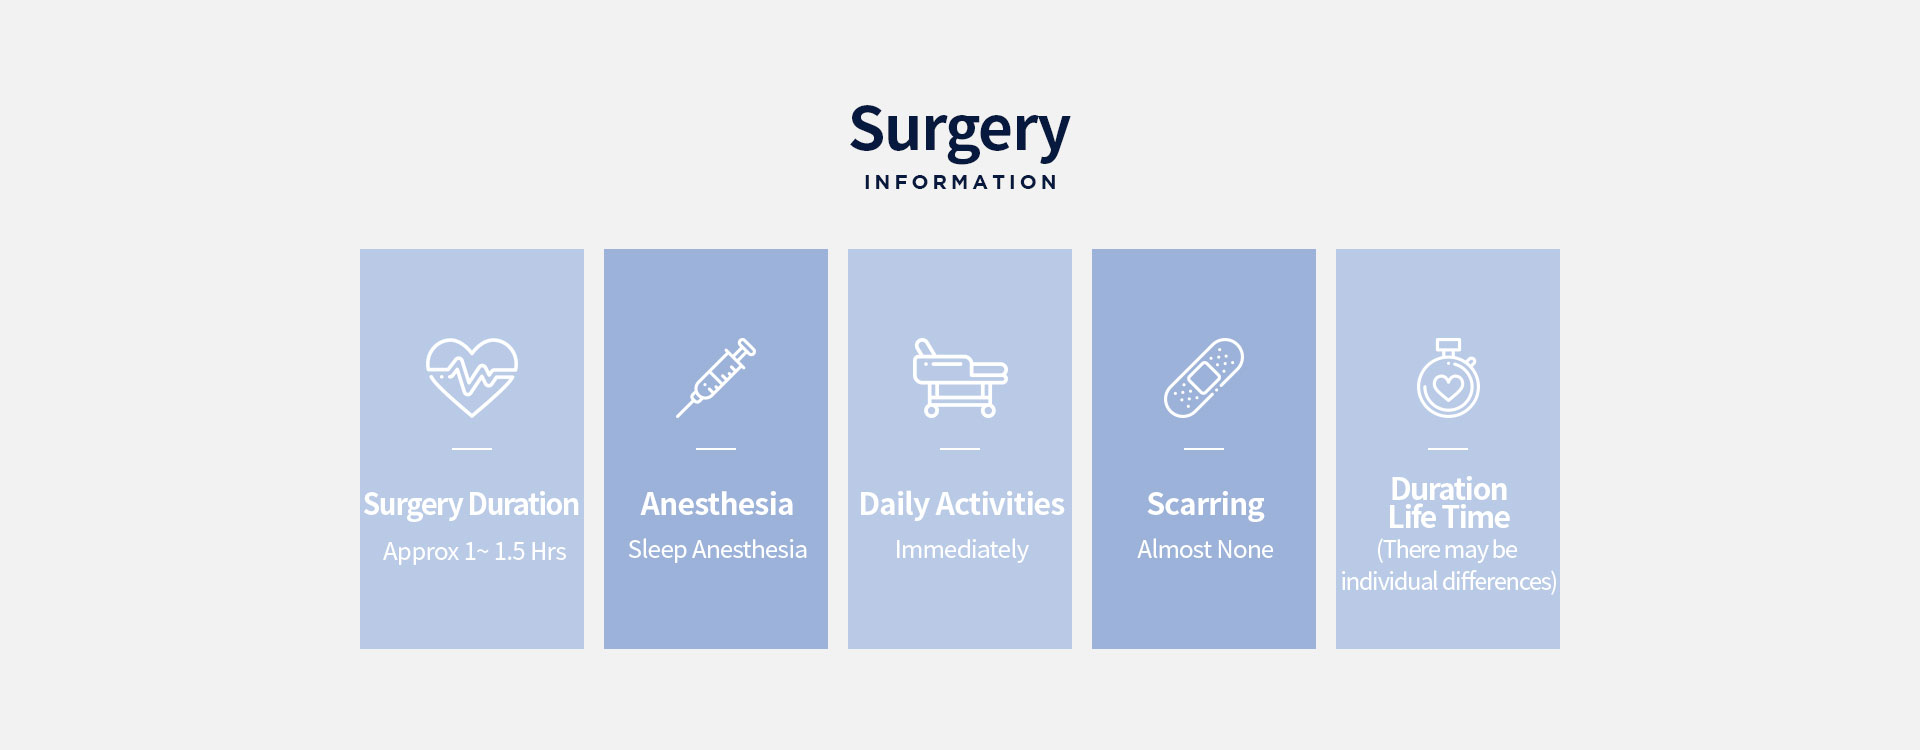 Surgery Information